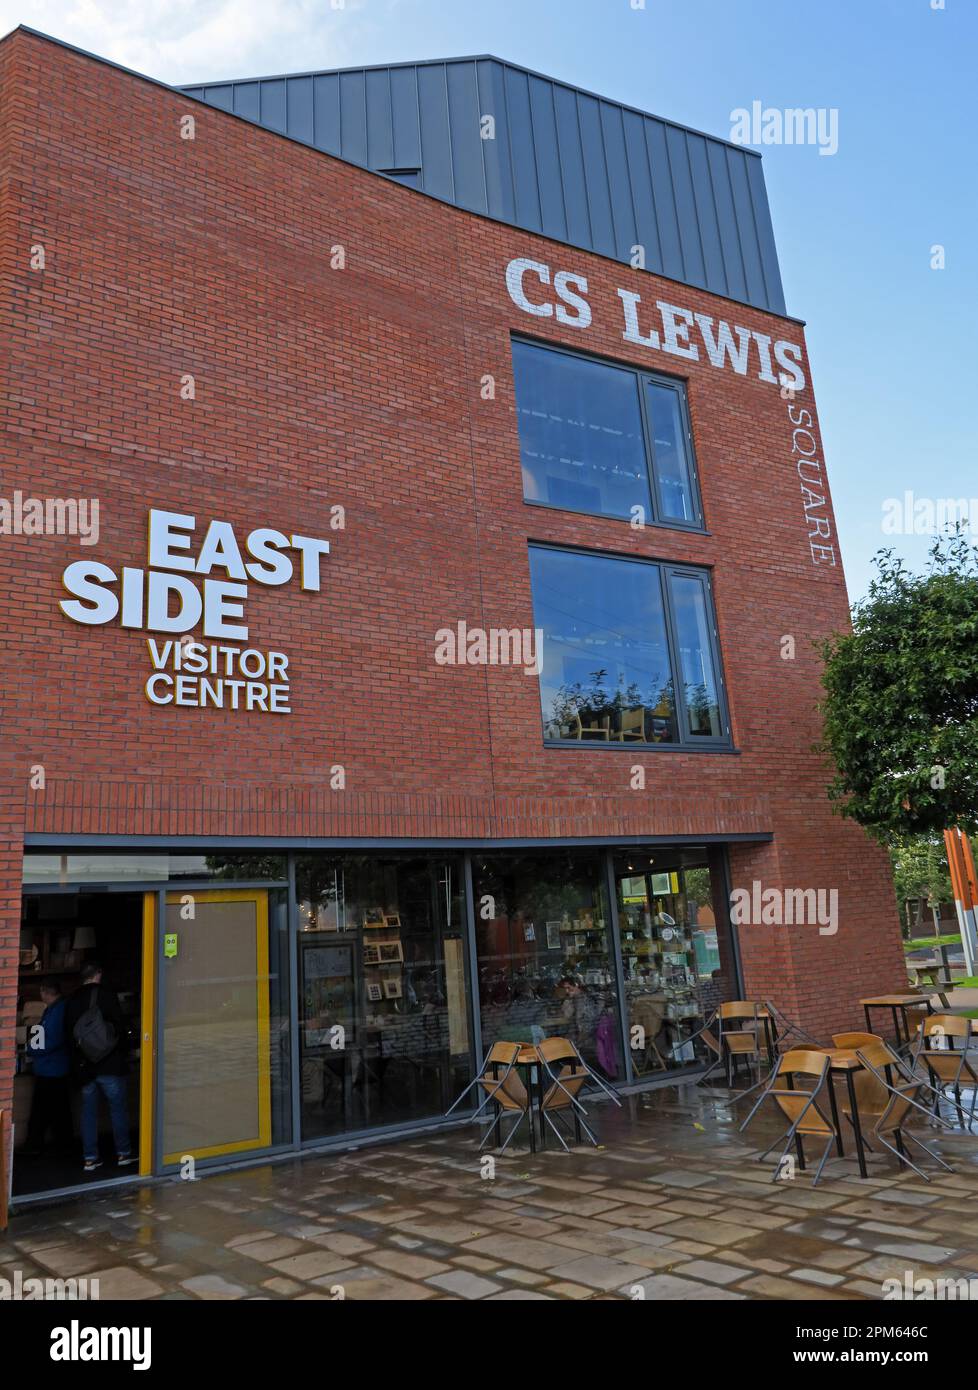 CS Lewis square building, East Side Visitor Centre, Visitor Centre, 402 Newtownards Road, Belfast, Northern Ireland, UK, BT4 1HH Stock Photo